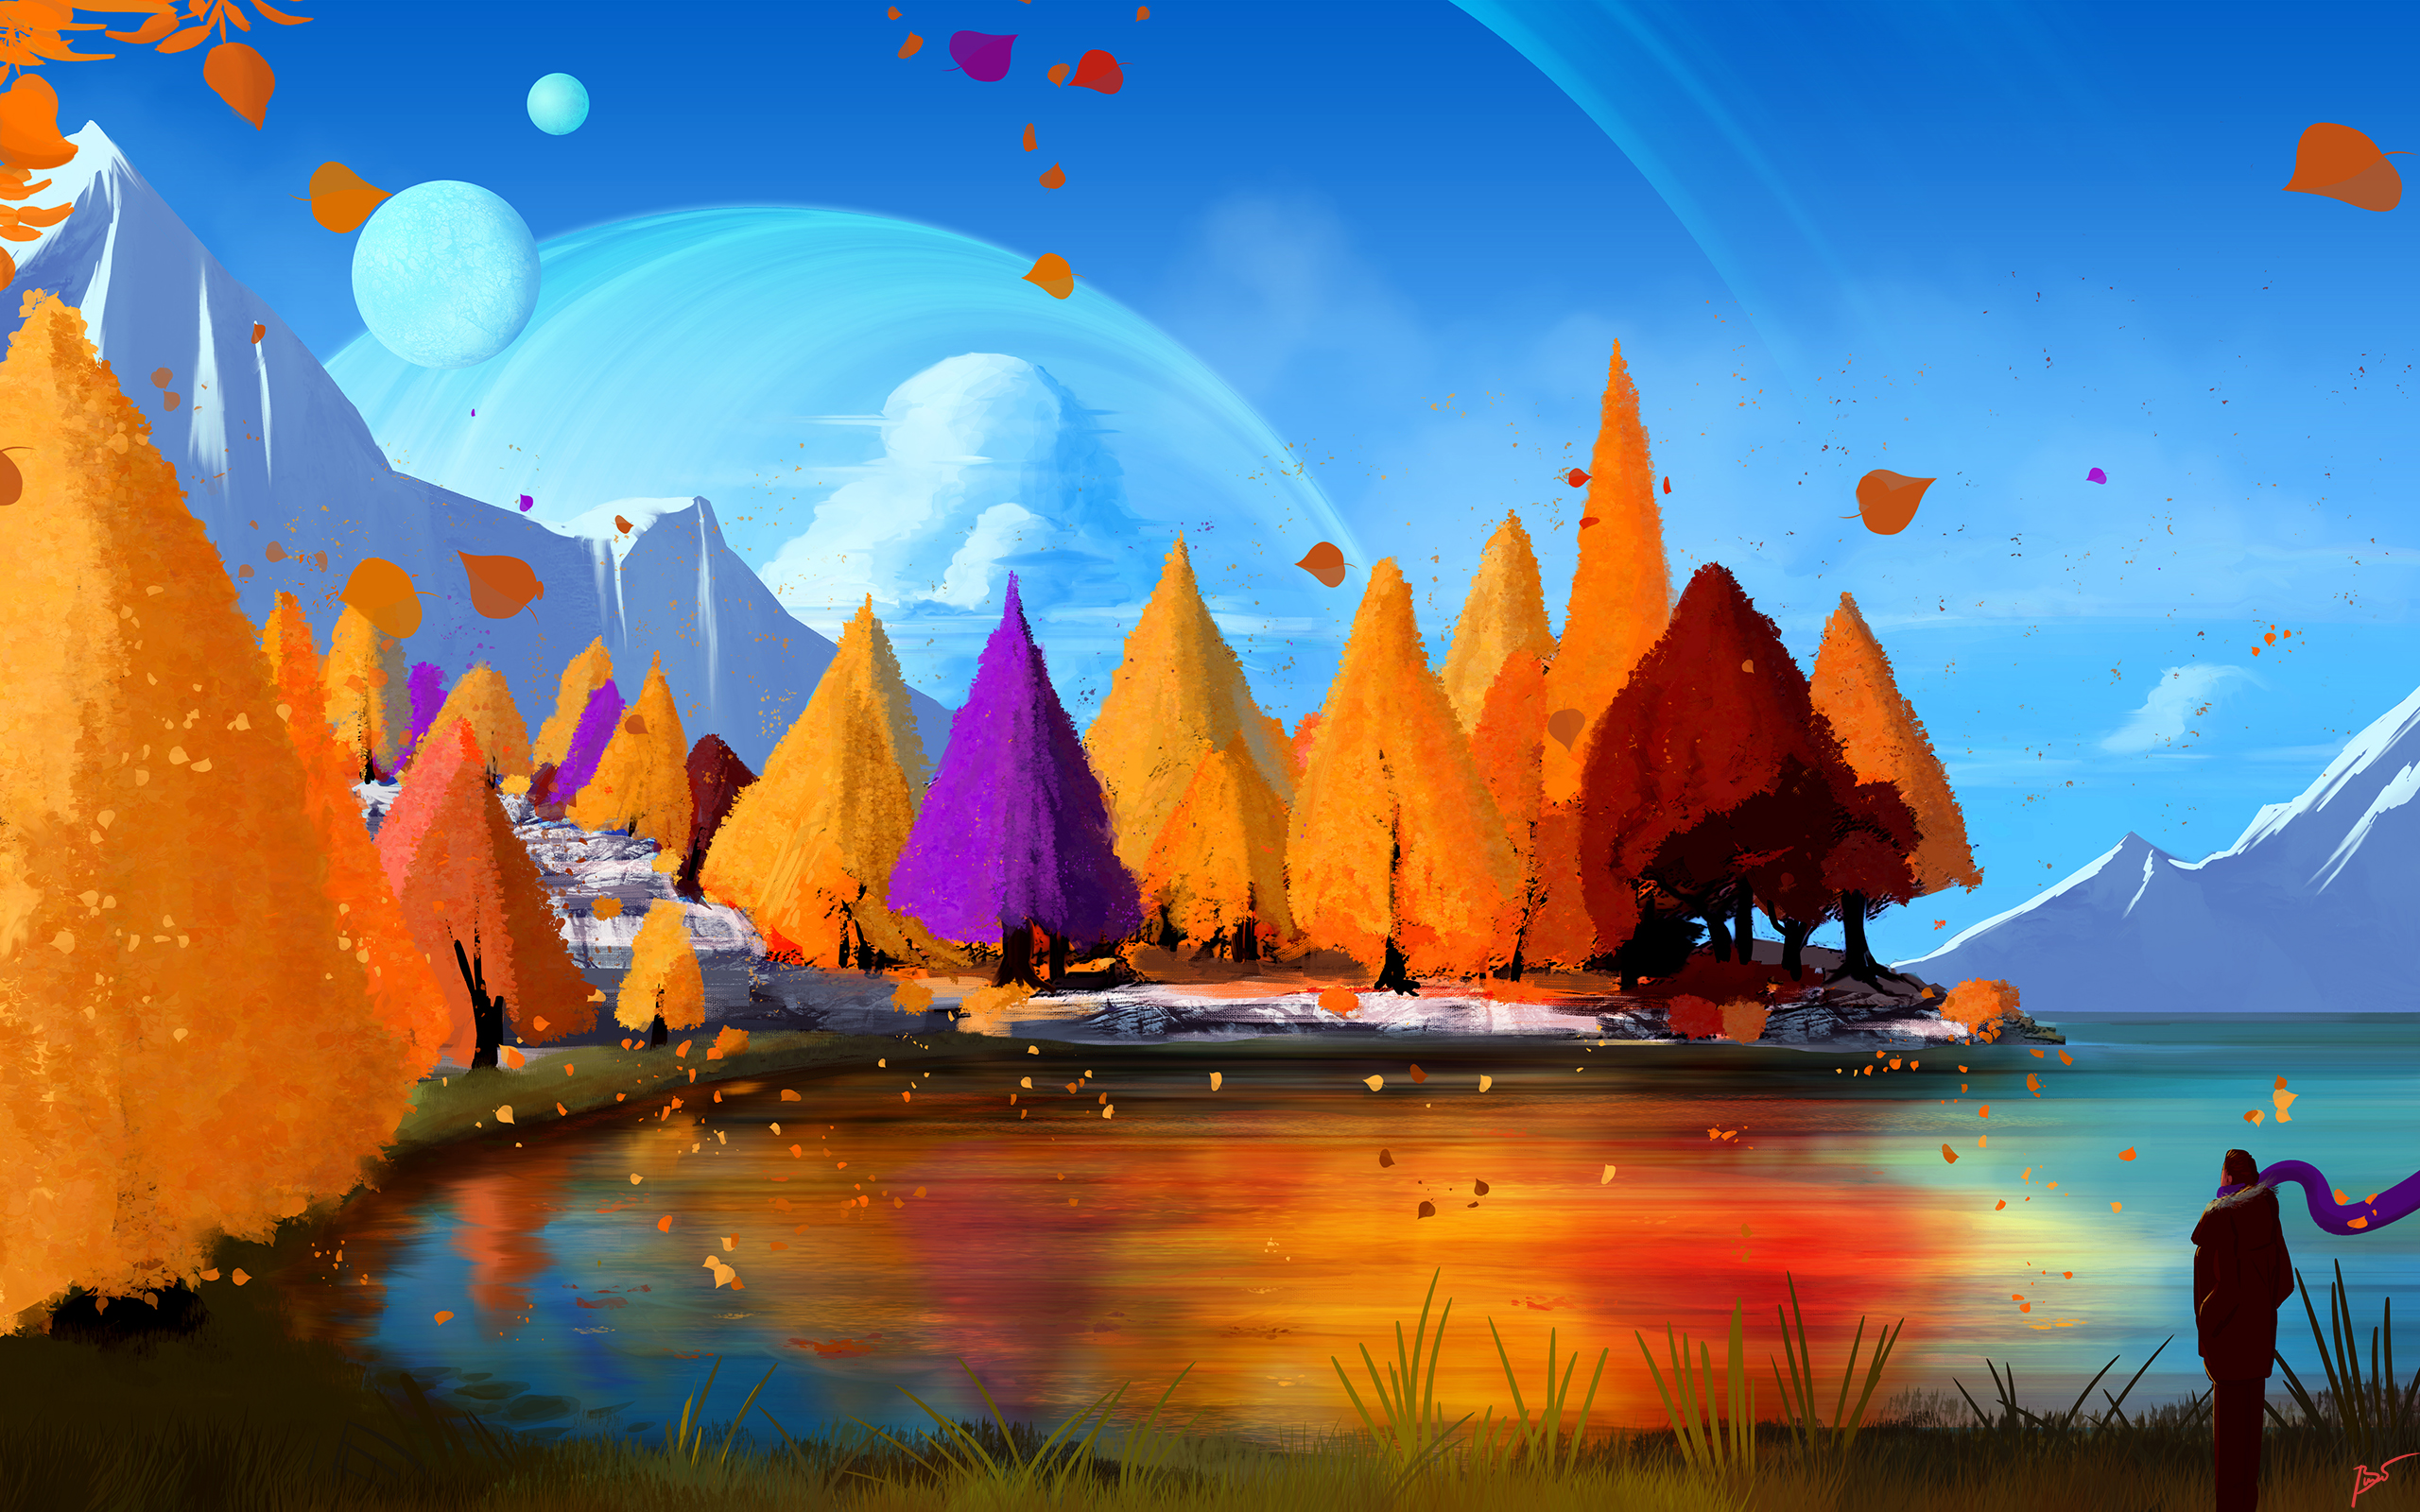 Autumn fall trees season paint hd artist k wallpapers images backgrounds photos and pictures